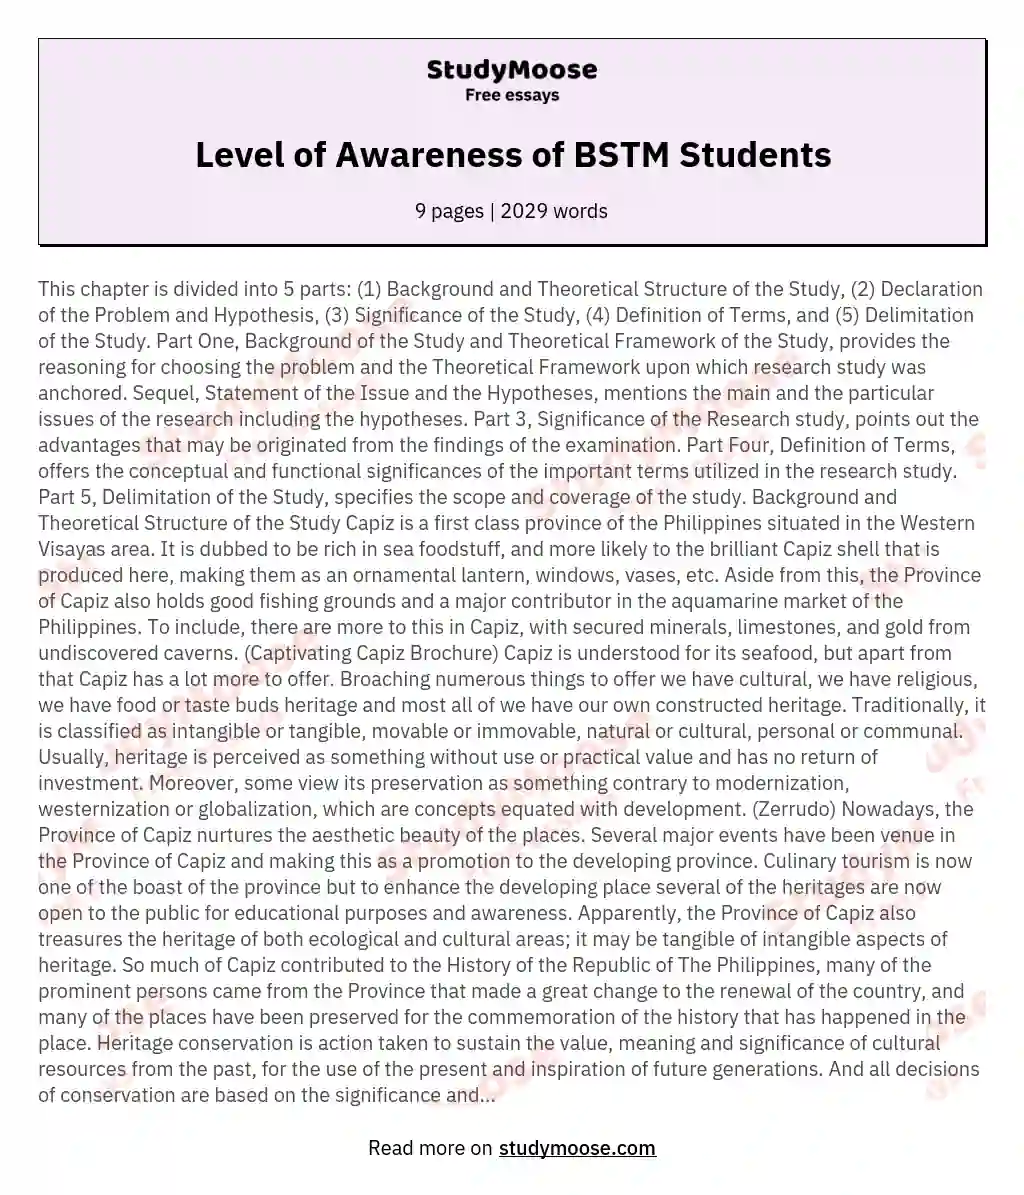 Level of Awareness of BSTM Students essay